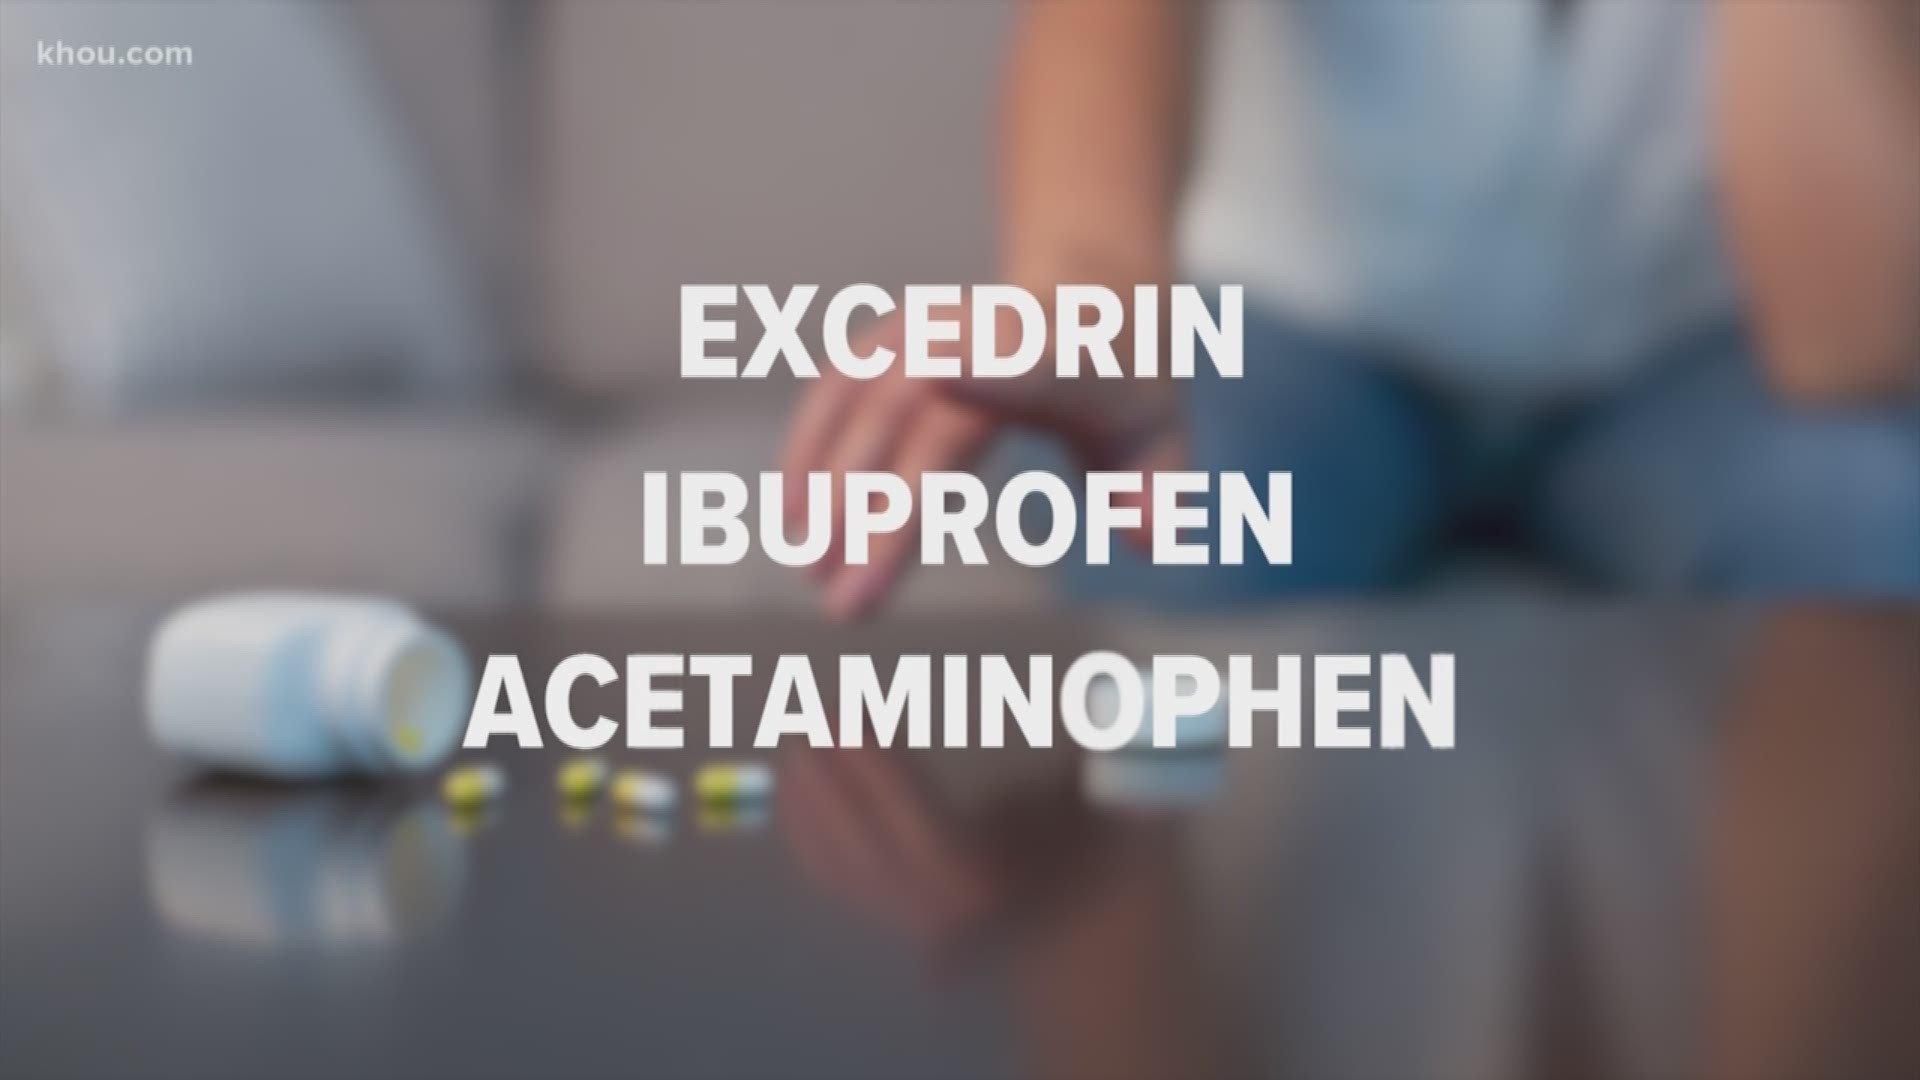 A new report from Crisis Text Line, which is a text-based suicide health line, points to these three words: Excedrin, Ibuprofen and acetaminophen.